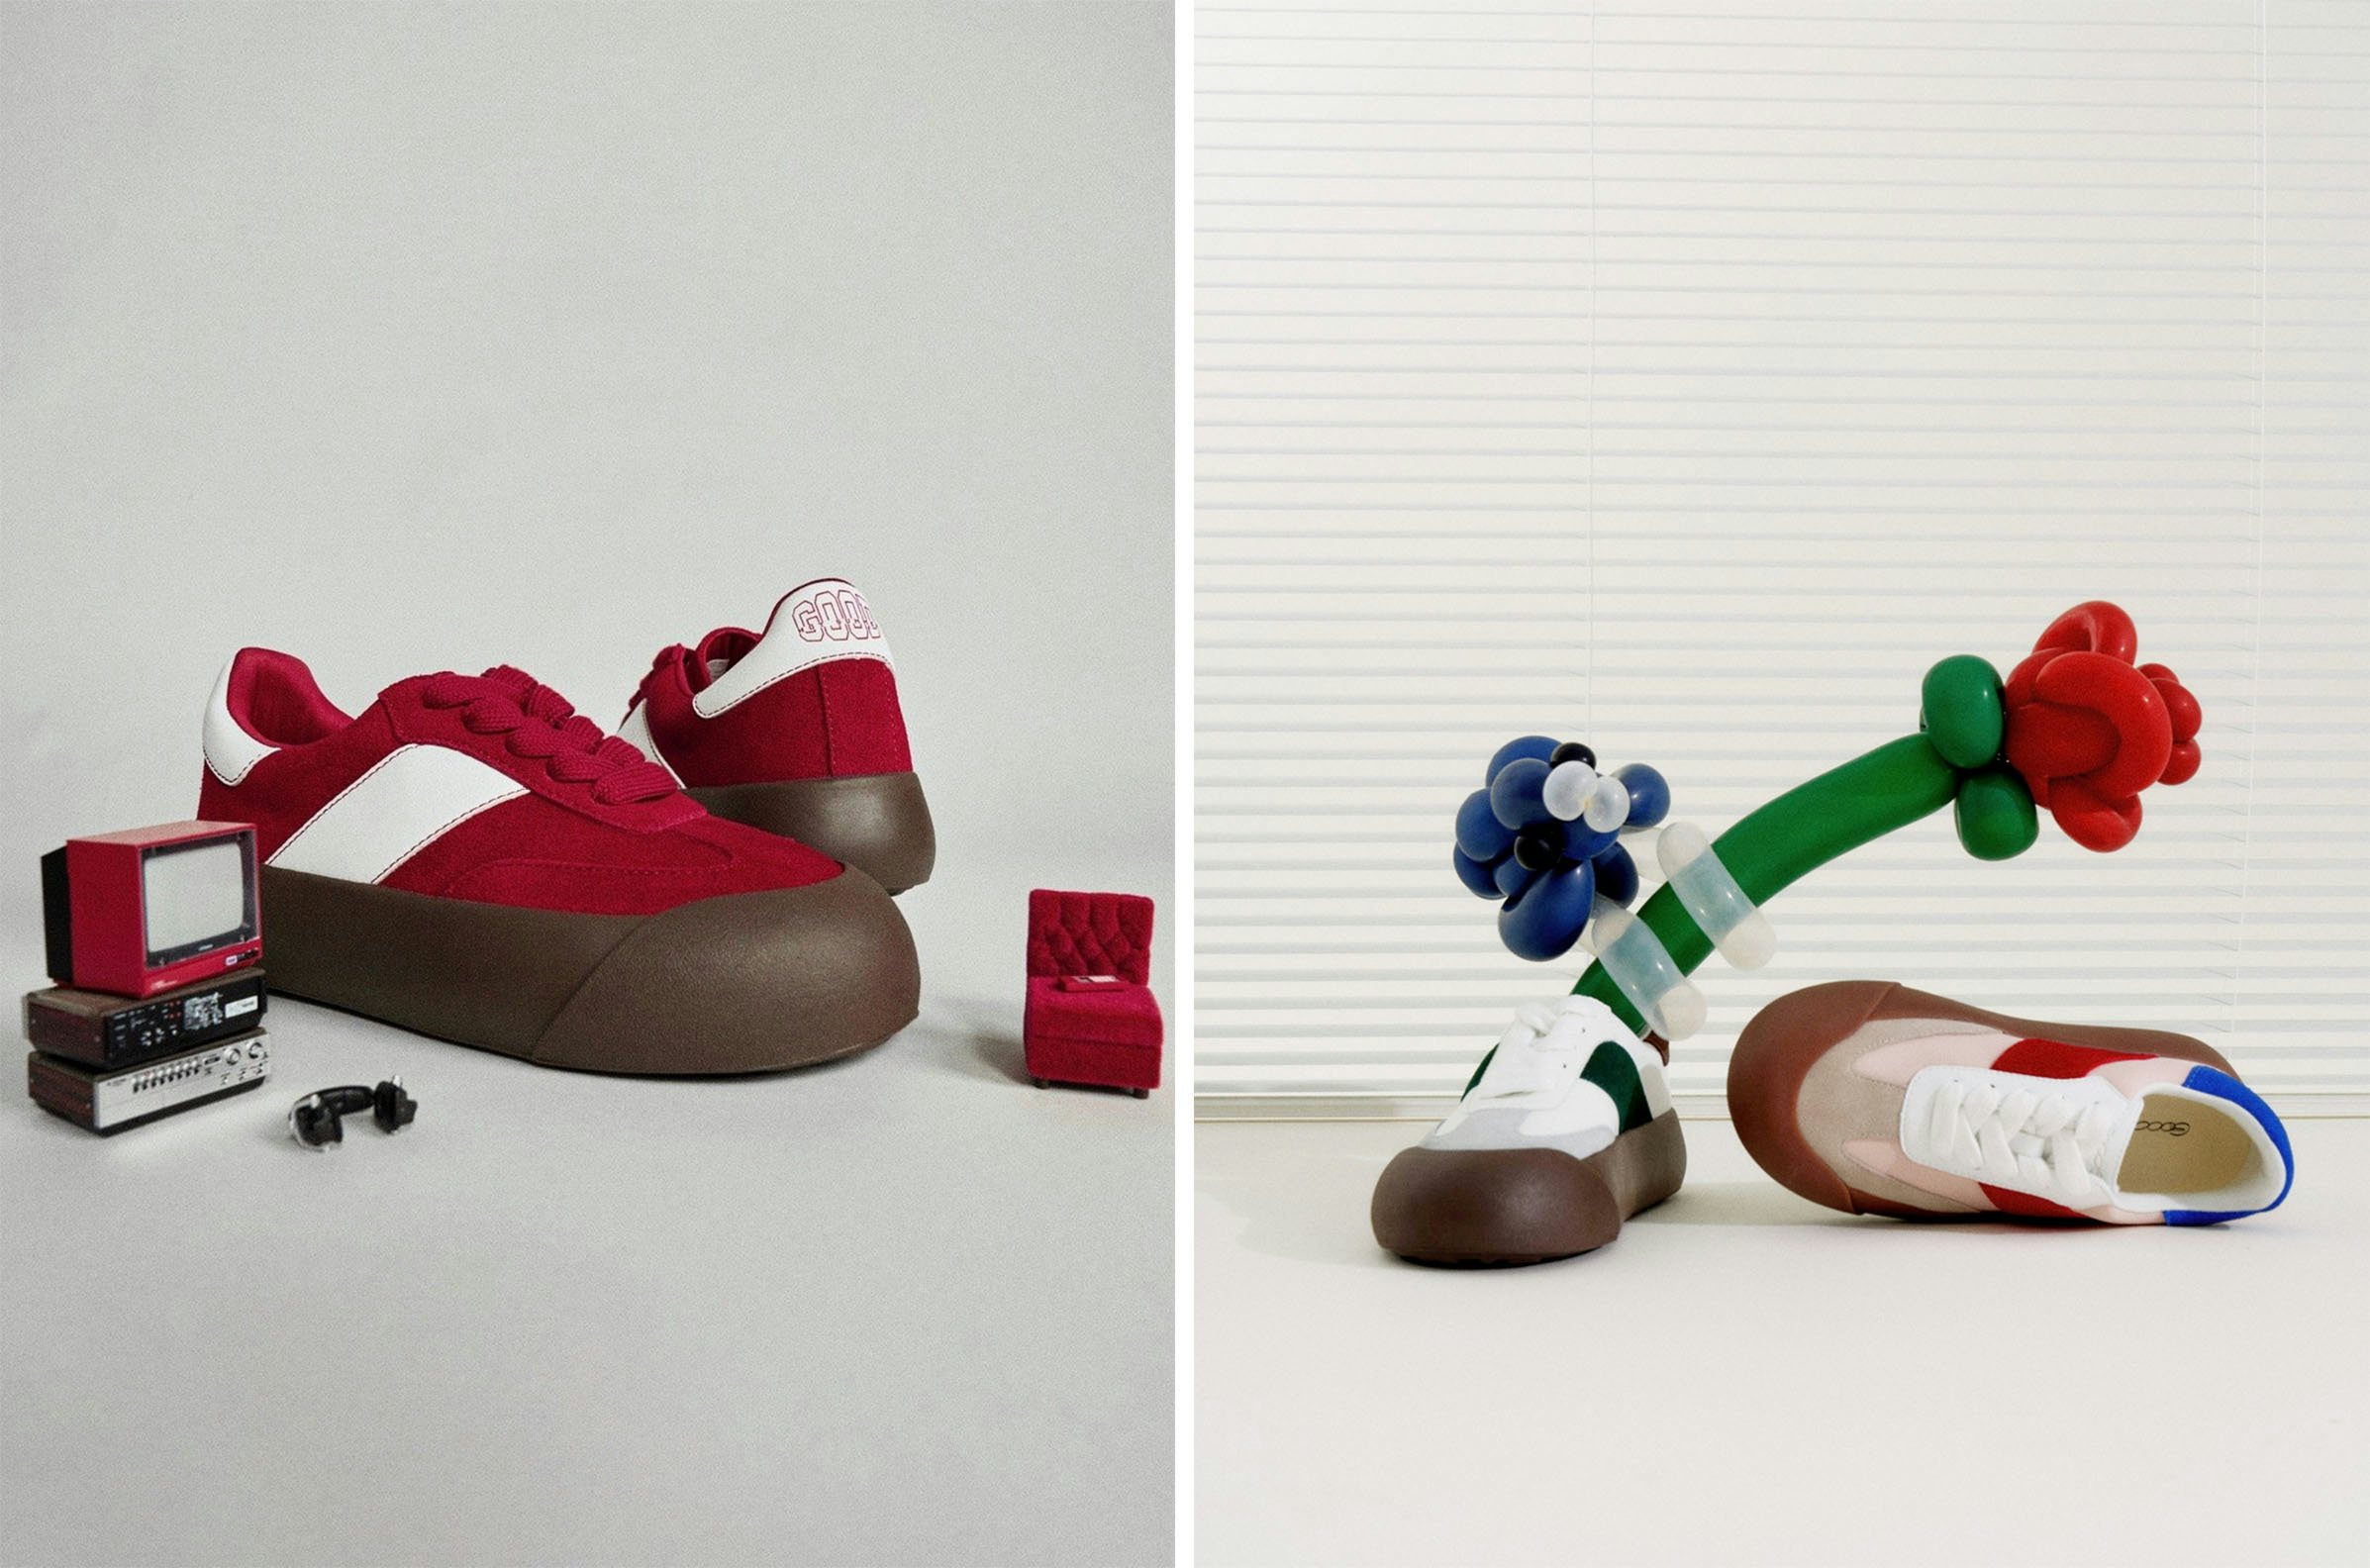 Goodbai's puffy “Dum Dum” sneakers are among its signature products. Photo: Goodbai